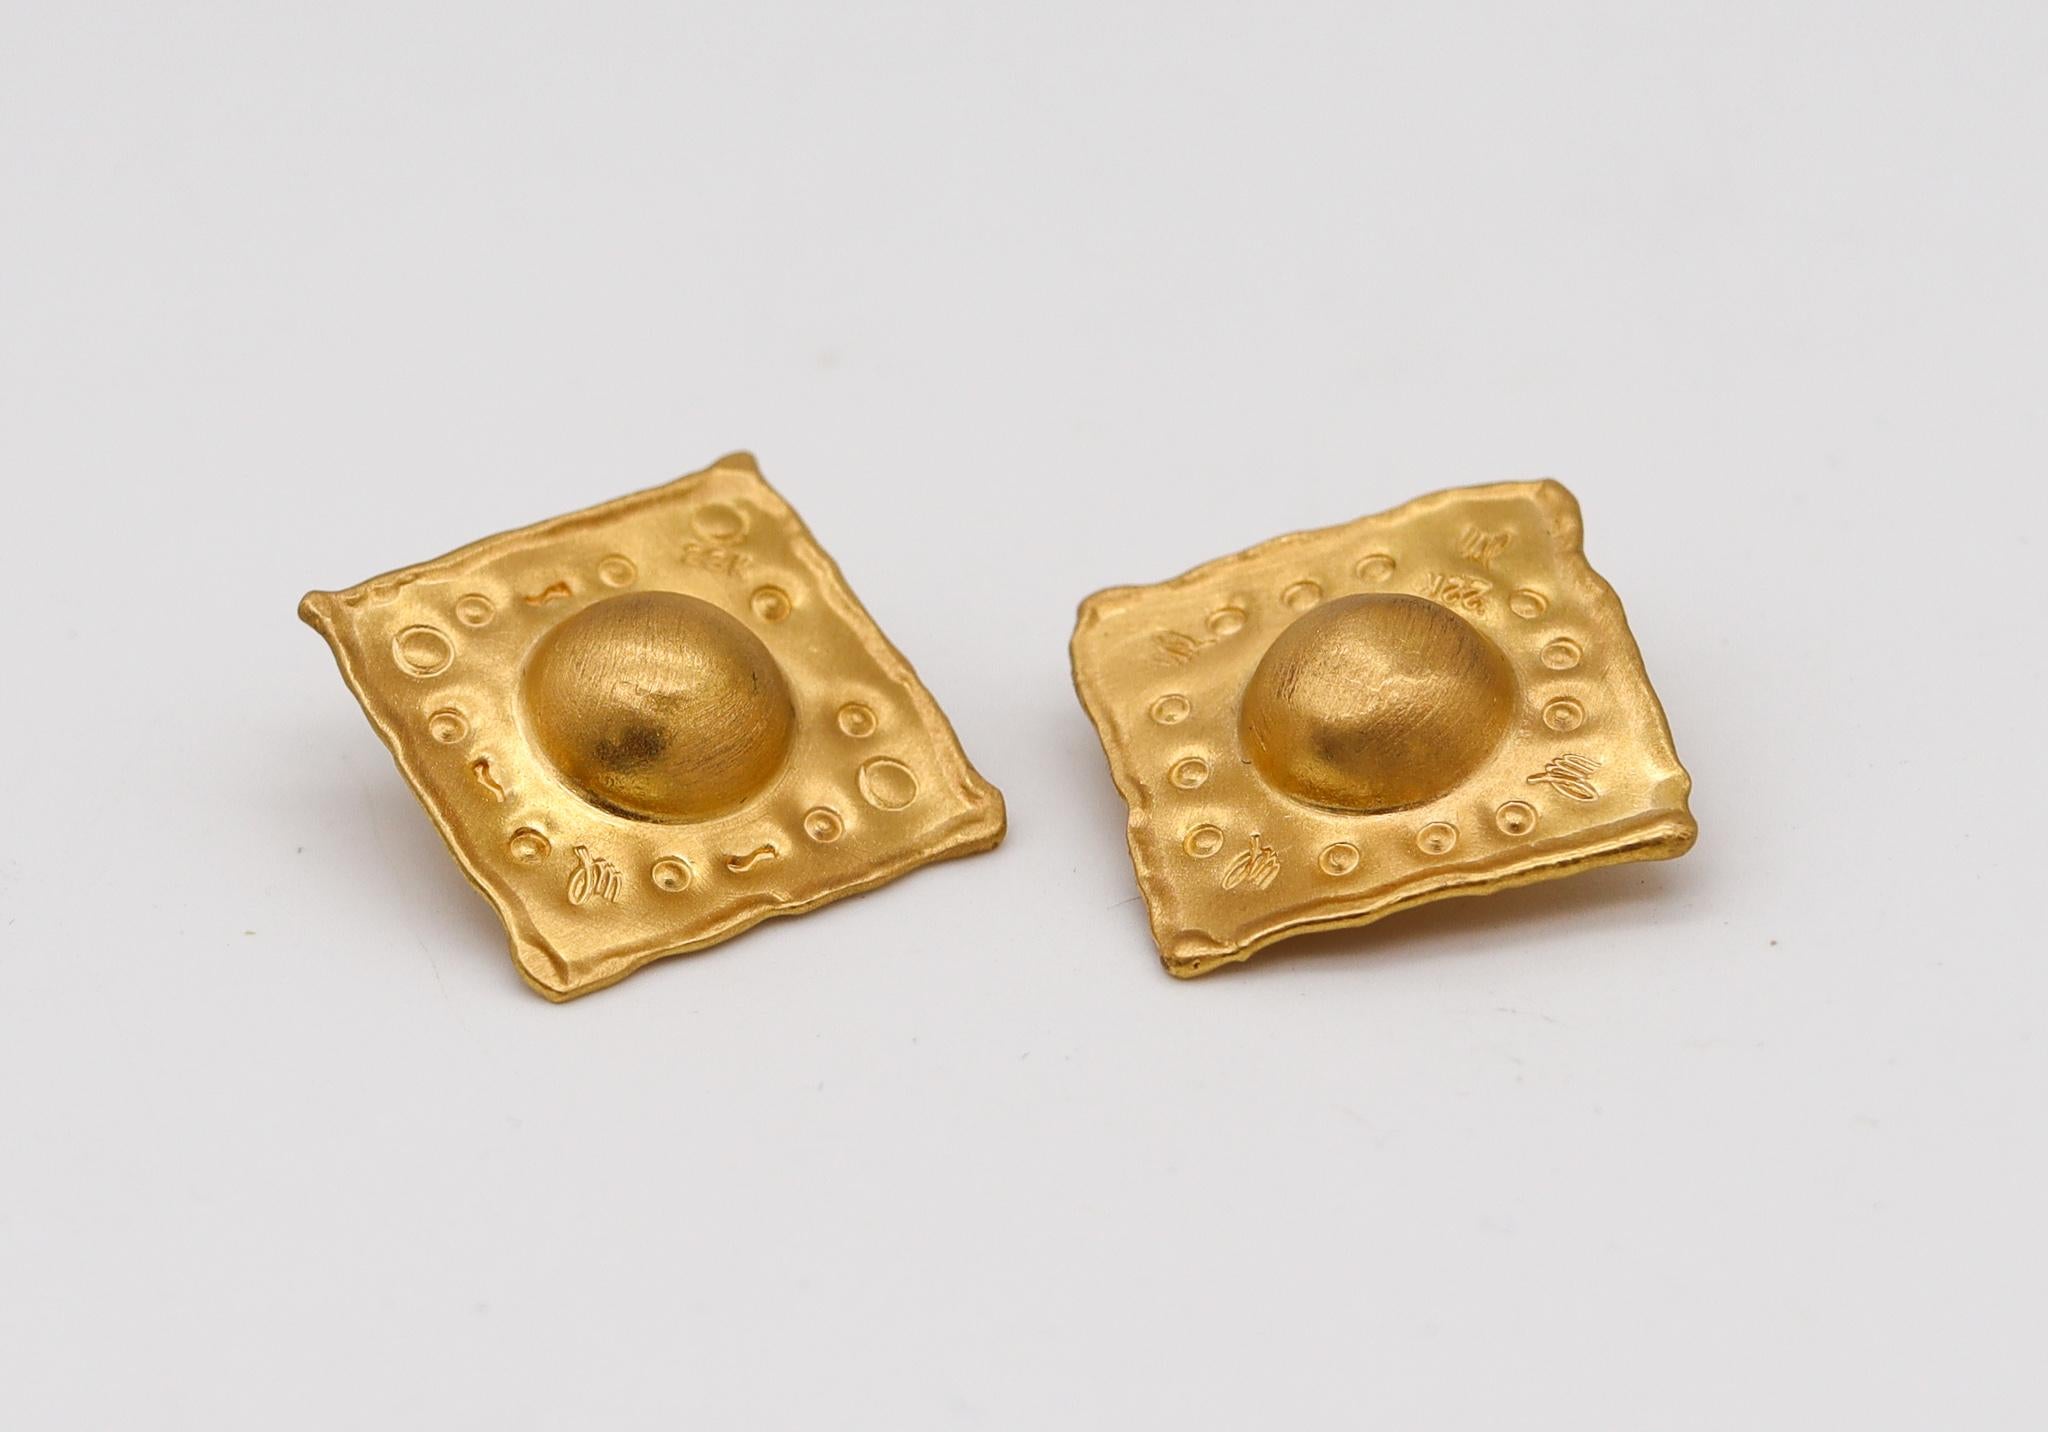 Textured earrings designed by Jean Mahie.

A beautiful pieces of art, created in Paris France by the artist and goldsmith Jean Mahie, back in the late 1980's. These pair of sculptural ear-clips earrings has been crafted in solid rich yellow gold of